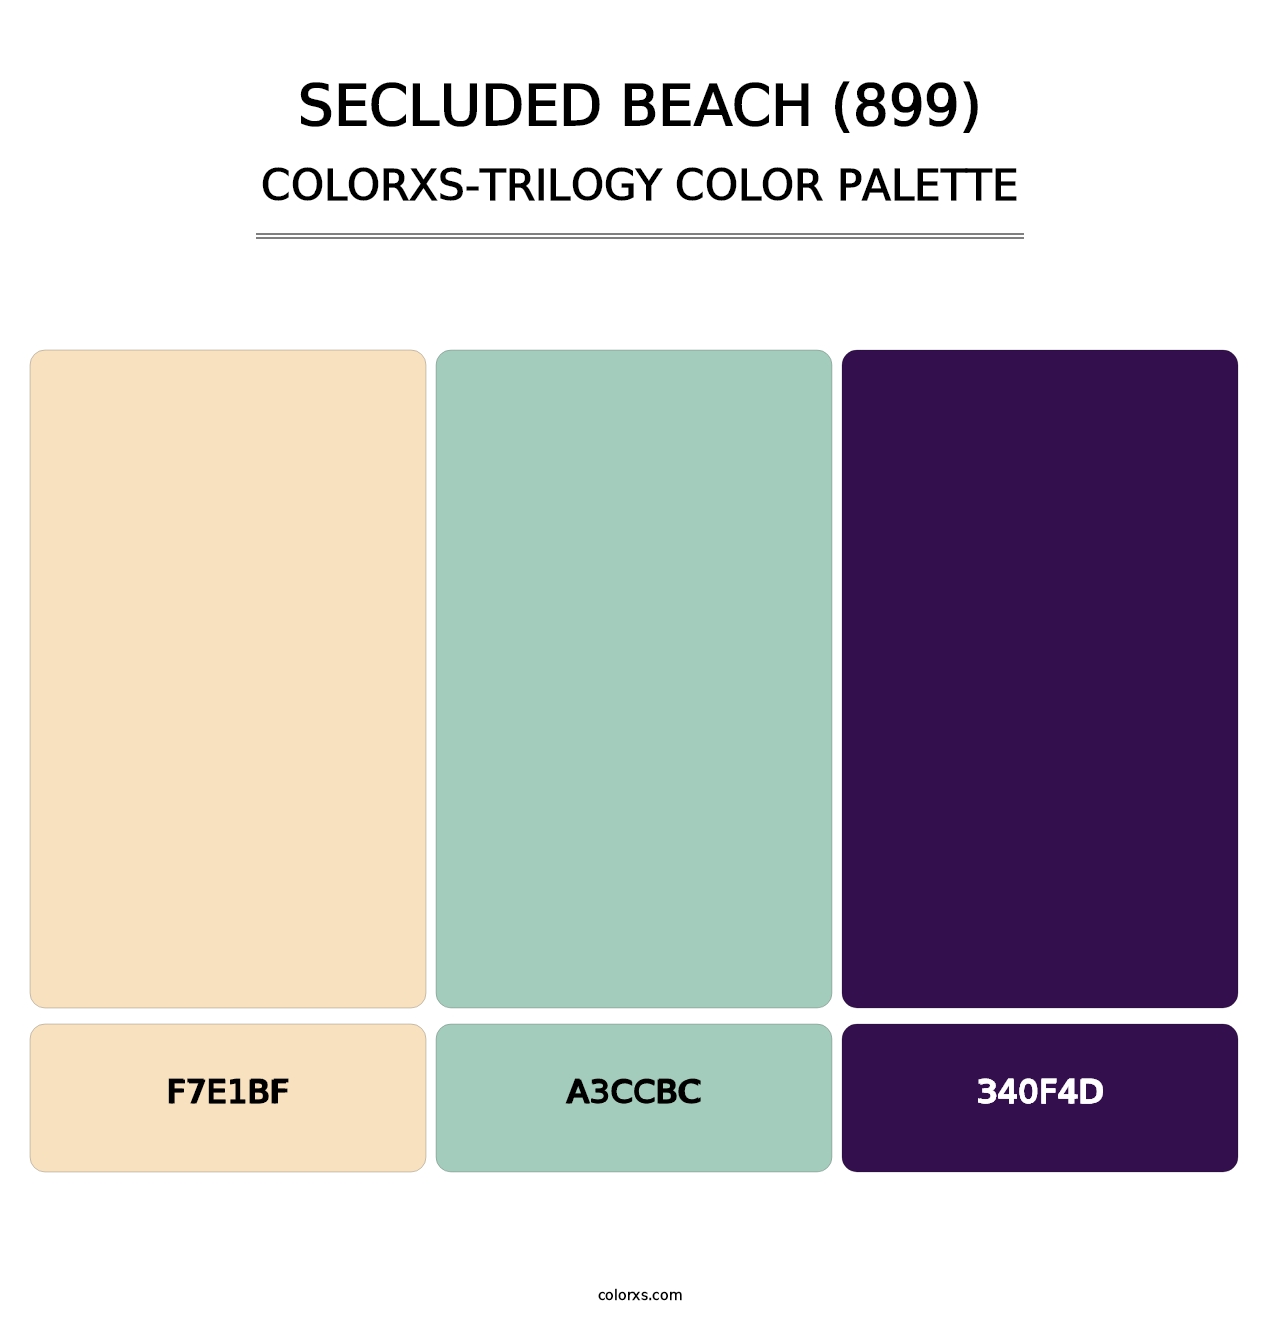 Secluded Beach (899) - Colorxs Trilogy Palette